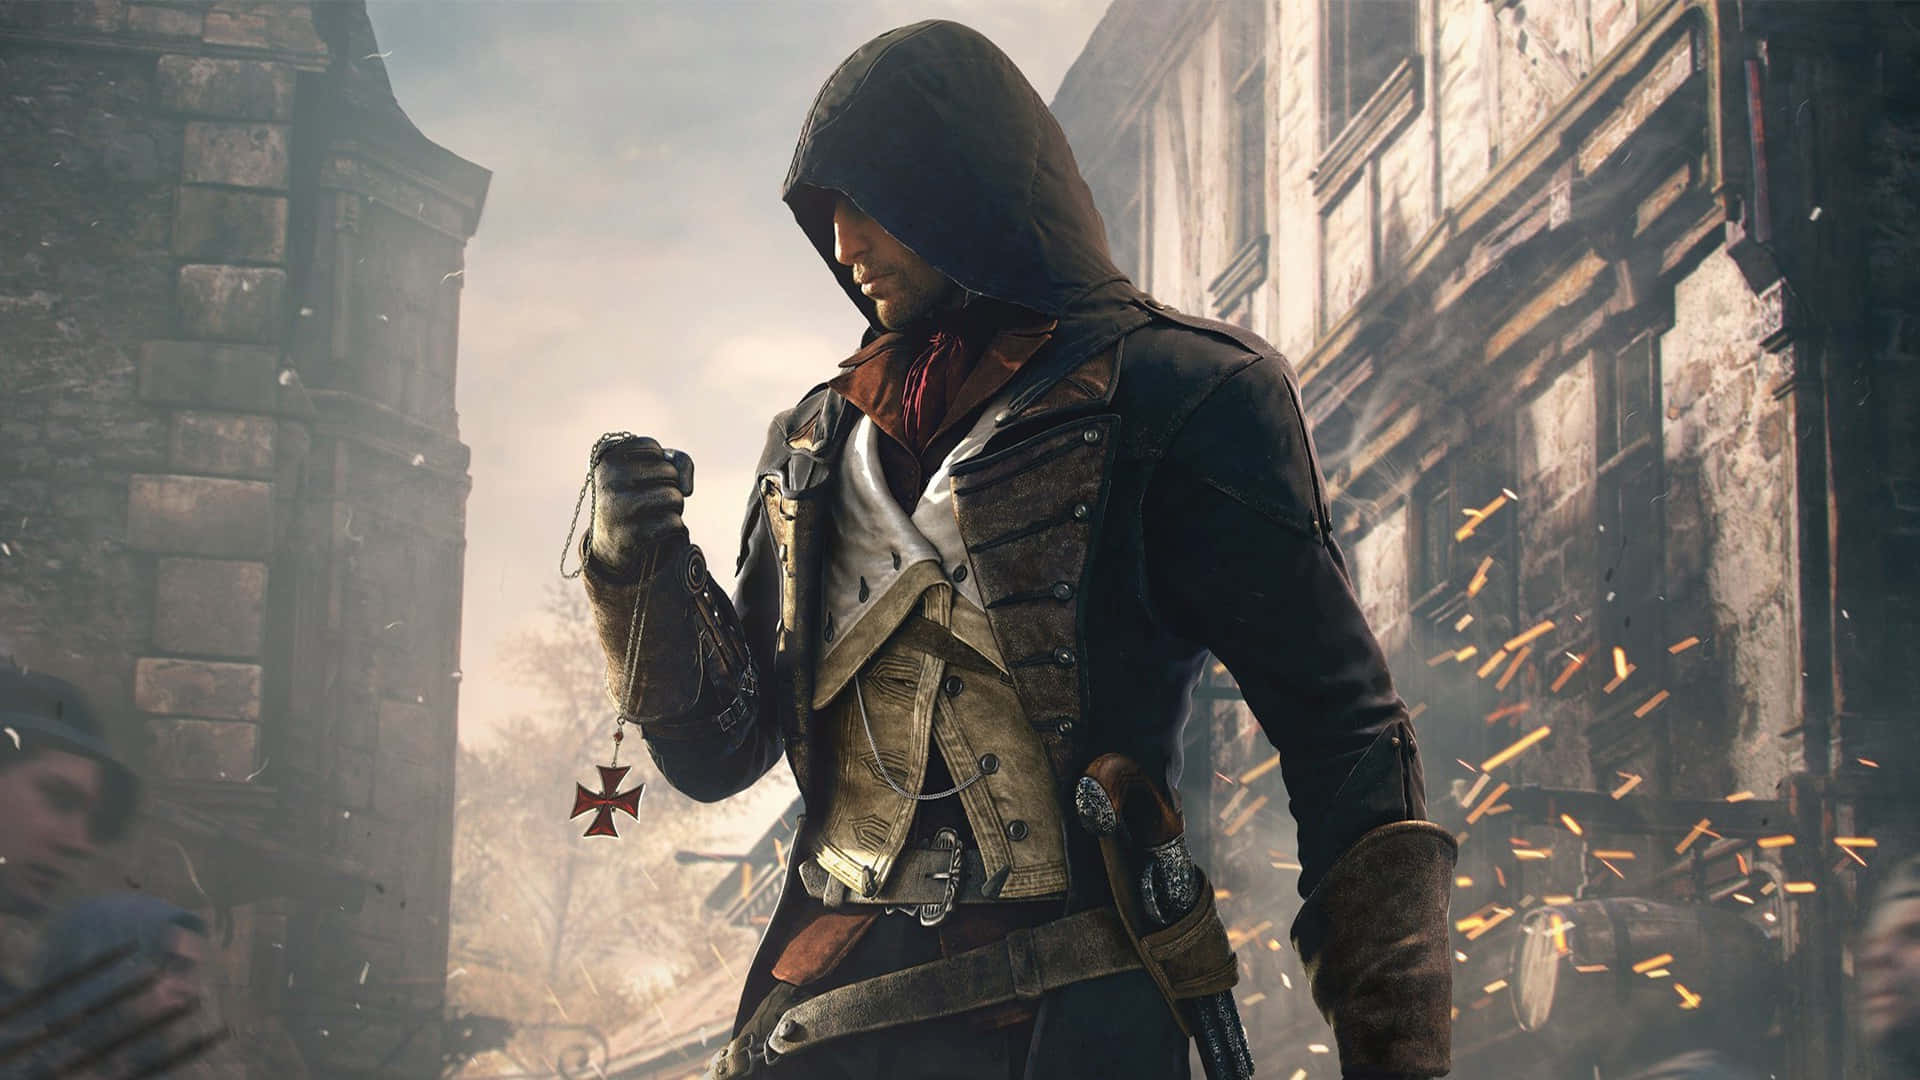 Intense action in Assassin's Creed Unity Wallpaper